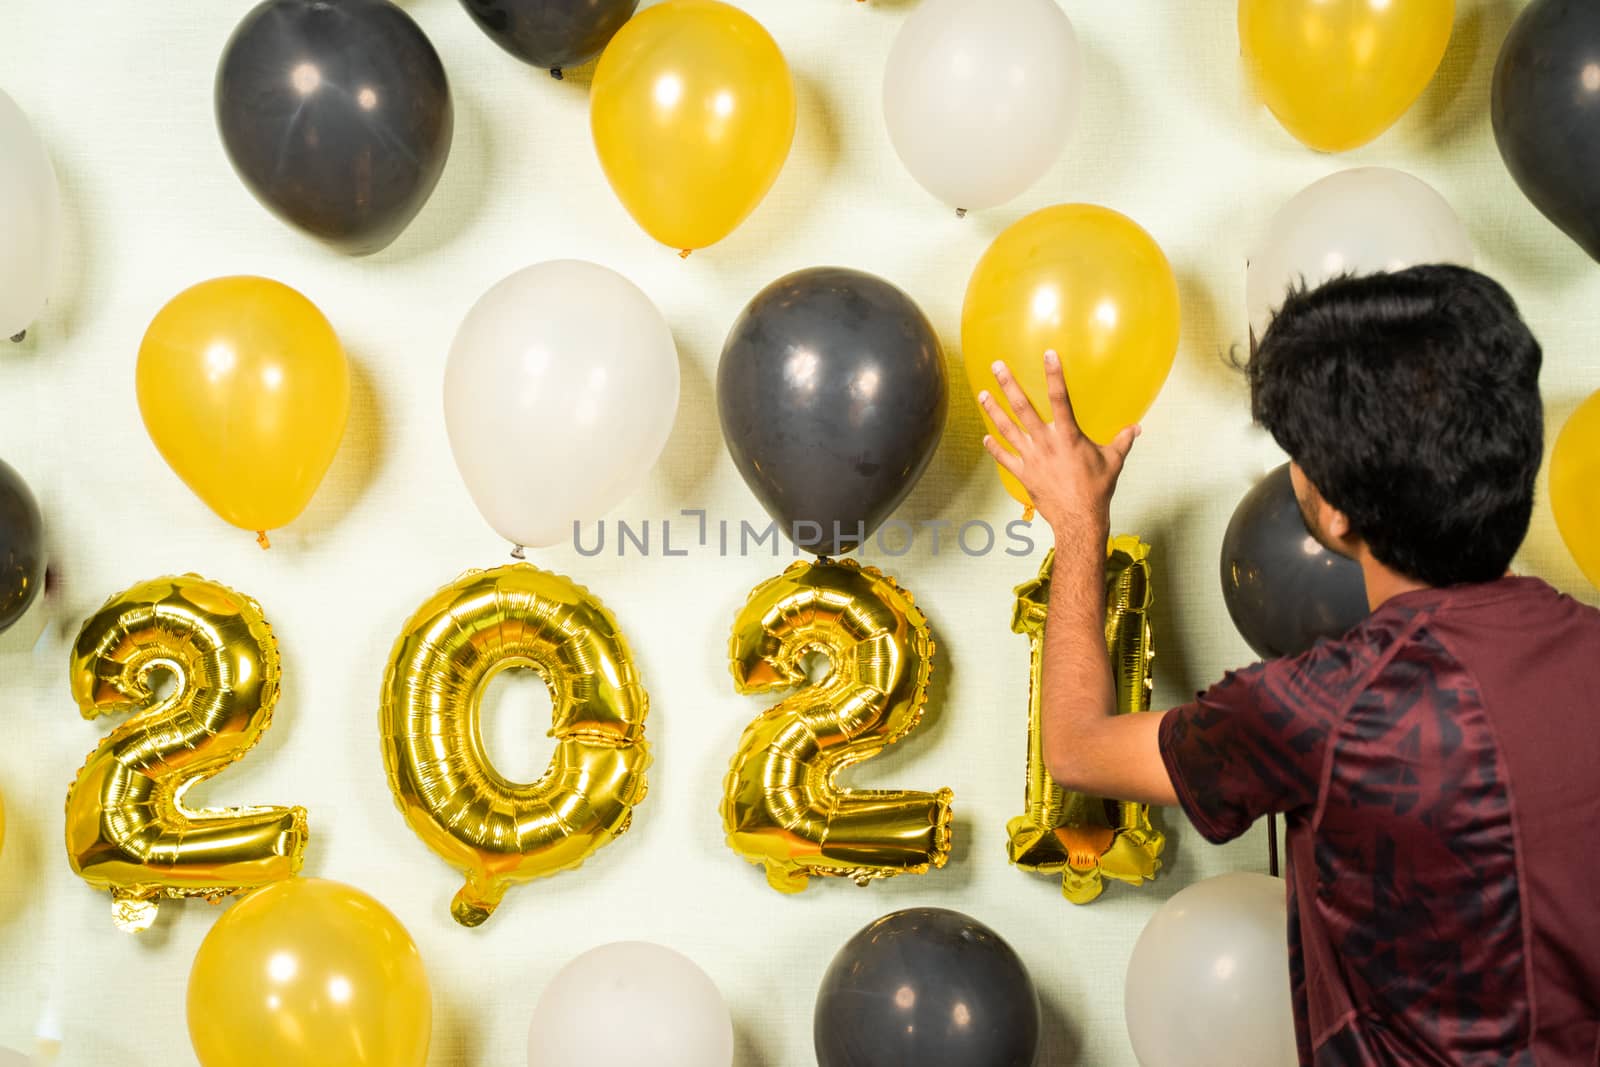 Selective Focucs on hand holding balloons, Concept of 2021 new year party decoration - Young man busy in decorating wall with balloons for new year party celebration. by lakshmiprasad.maski@gmai.com